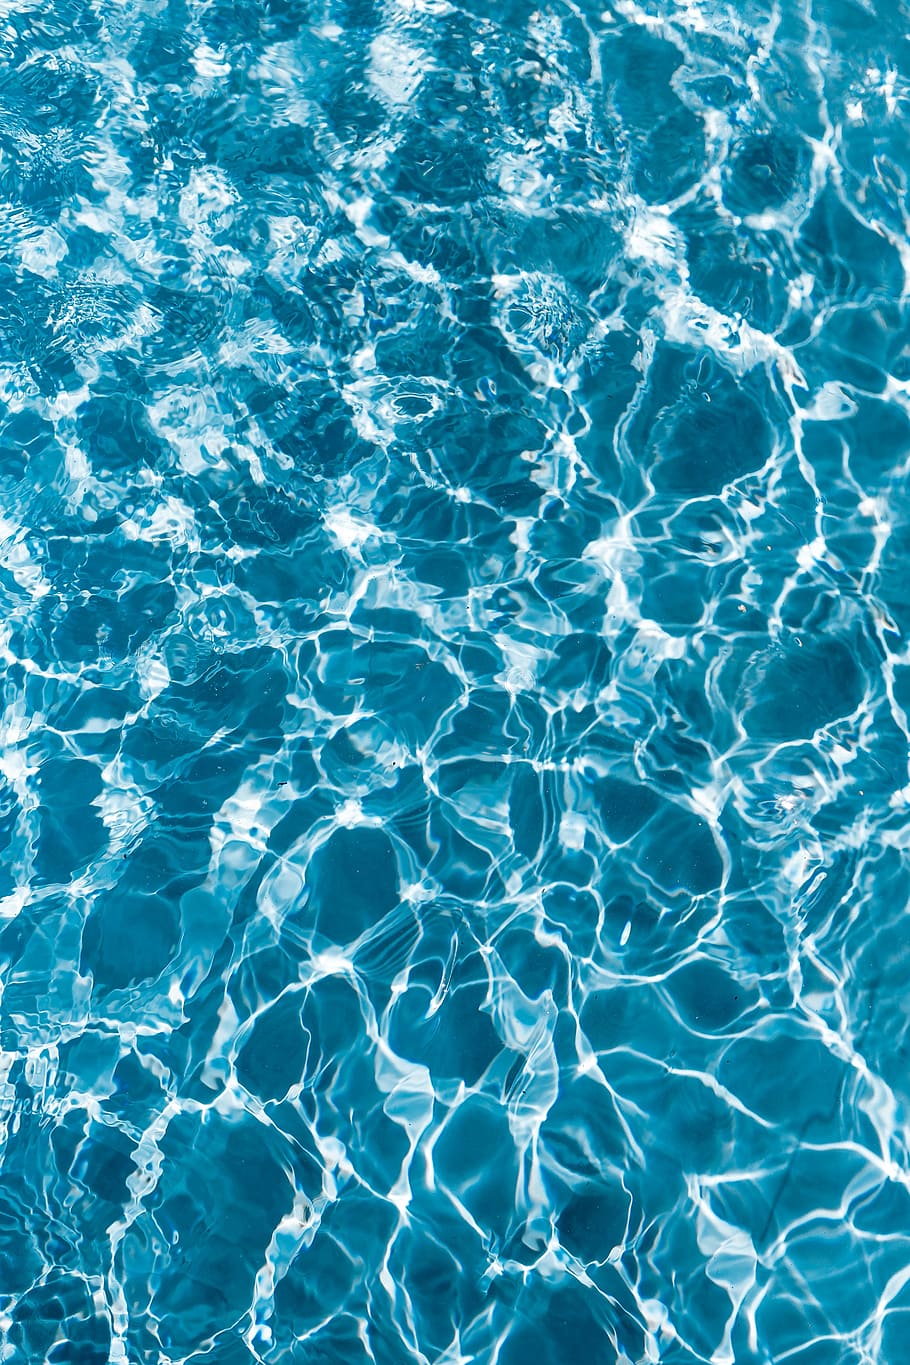 20 Swimming Pool Pictures  Download Free Images  Stock Photos on  Unsplash  Blue aesthetic pastel Swimming pool pictures Light blue  aesthetic